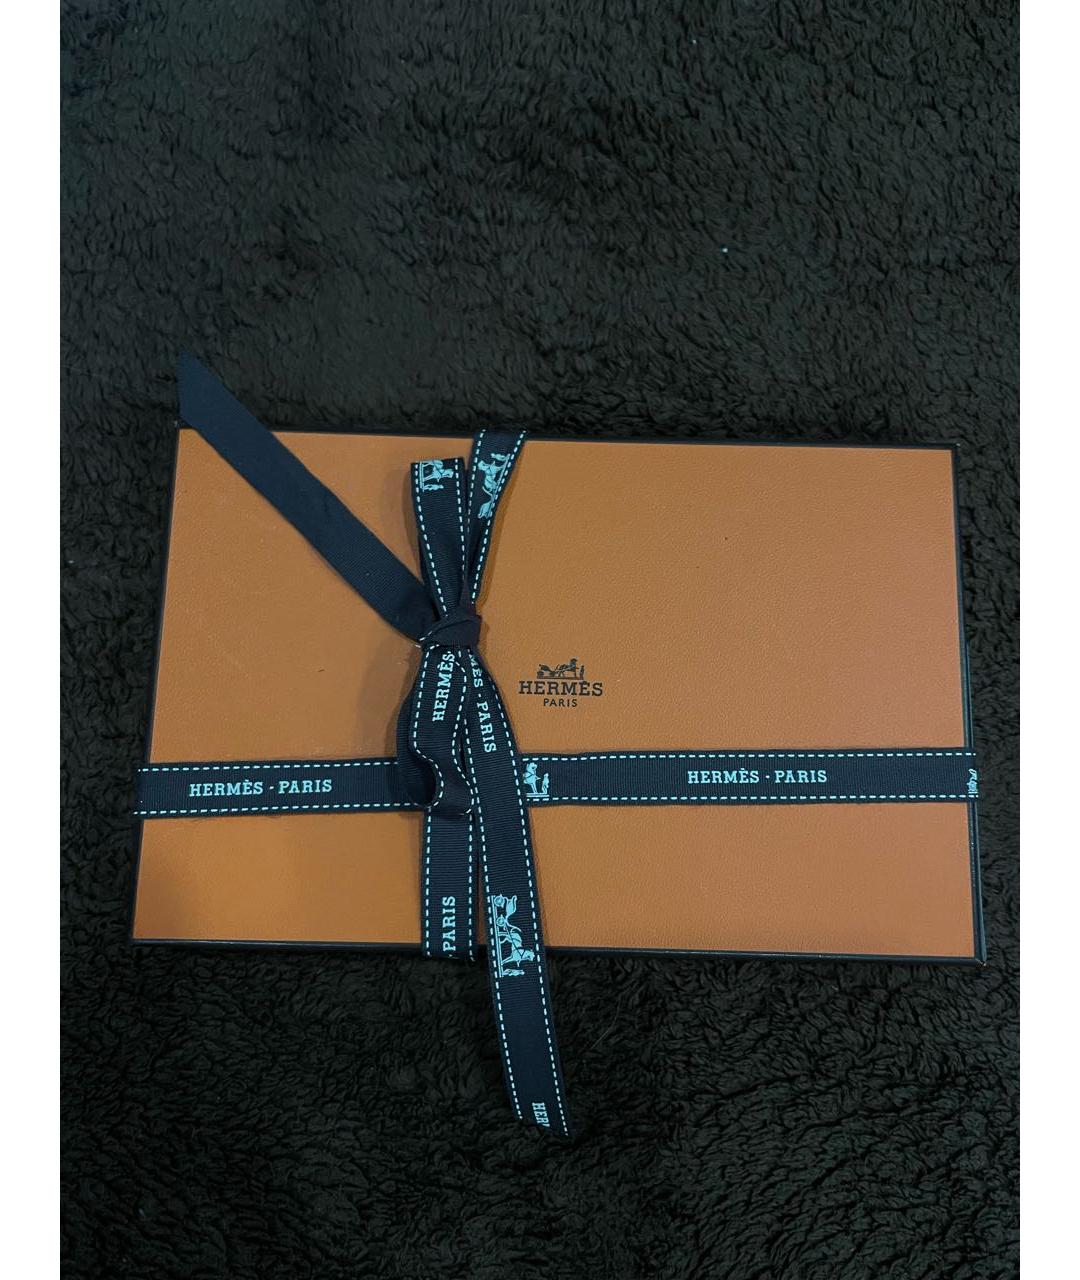 HERMES PRE-OWNED Брелок, фото 2